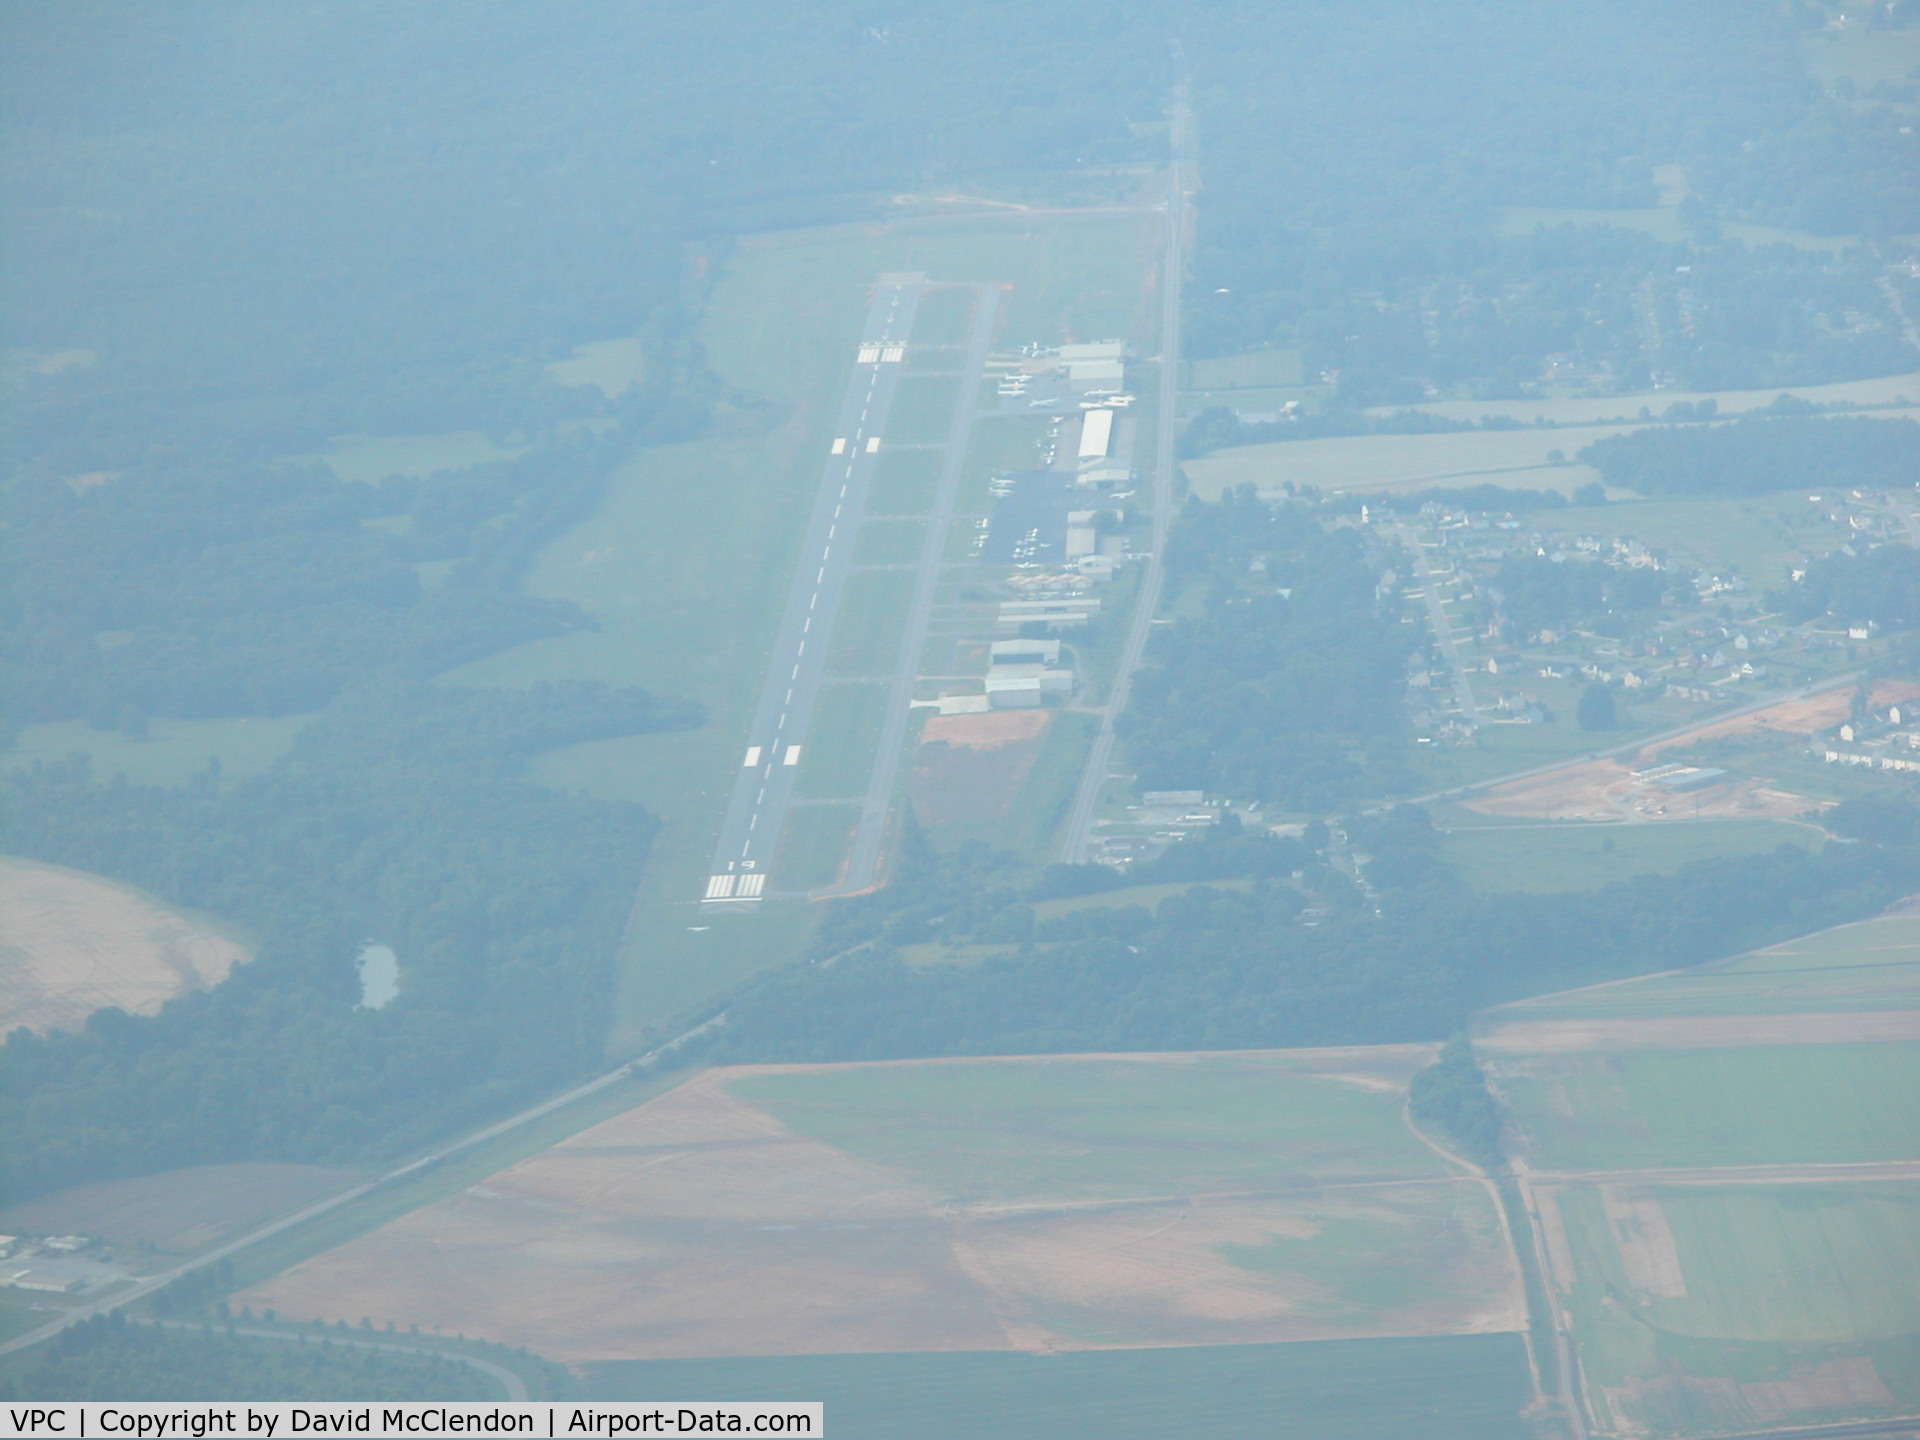 Cartersville Airport (VPC) - looking to the south